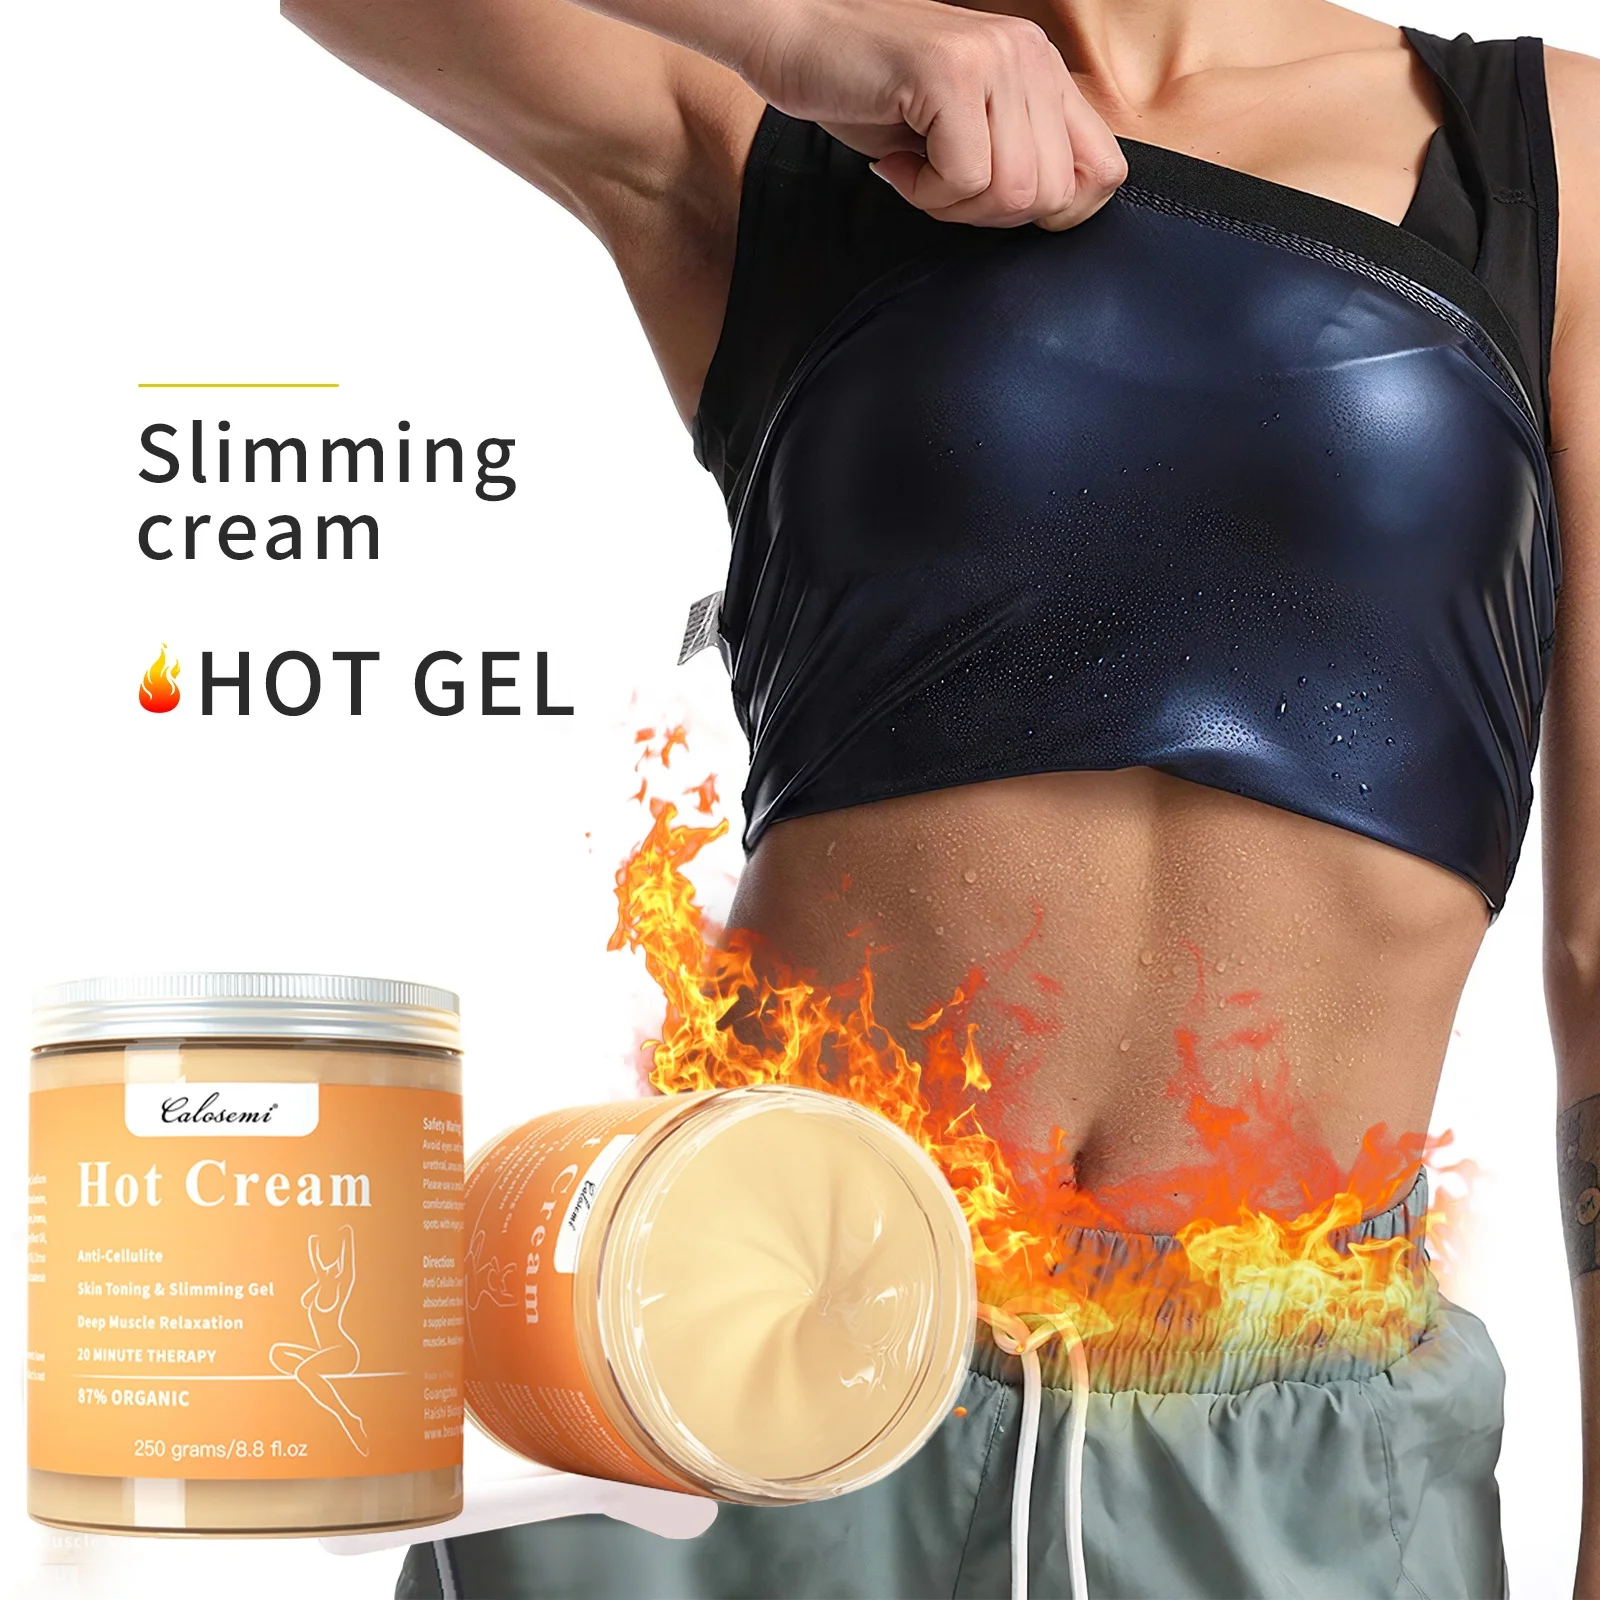 

Wholesale Private Label Organic Skin Care Weight Loss Cream Hot Massage Anti Cellulite Waist Slimming Sweat Gel For Fat Burn